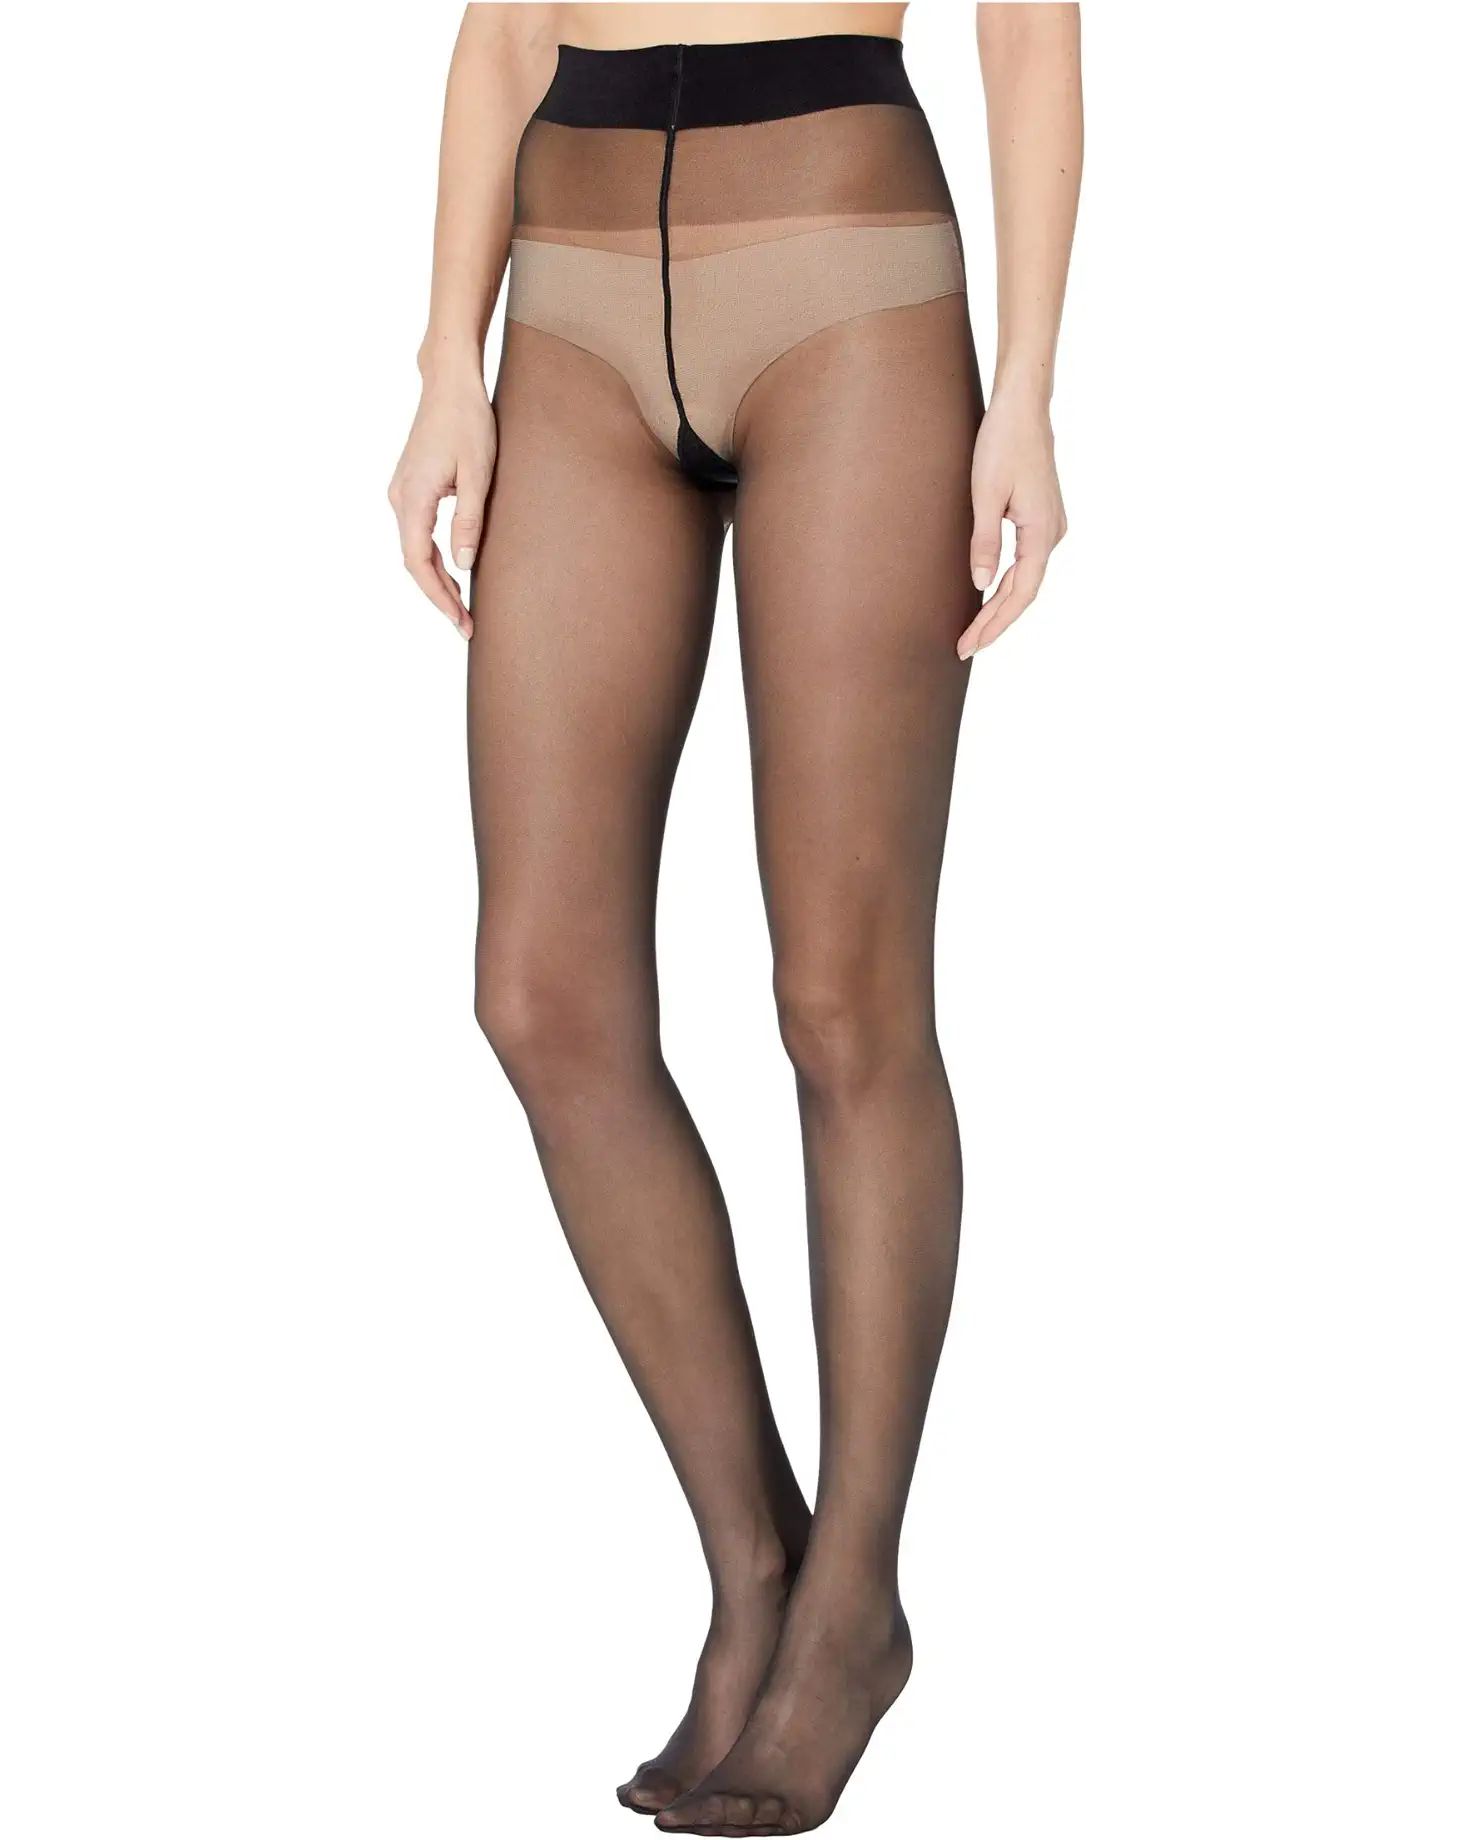 Satin Touch 20 Tights | Zappos